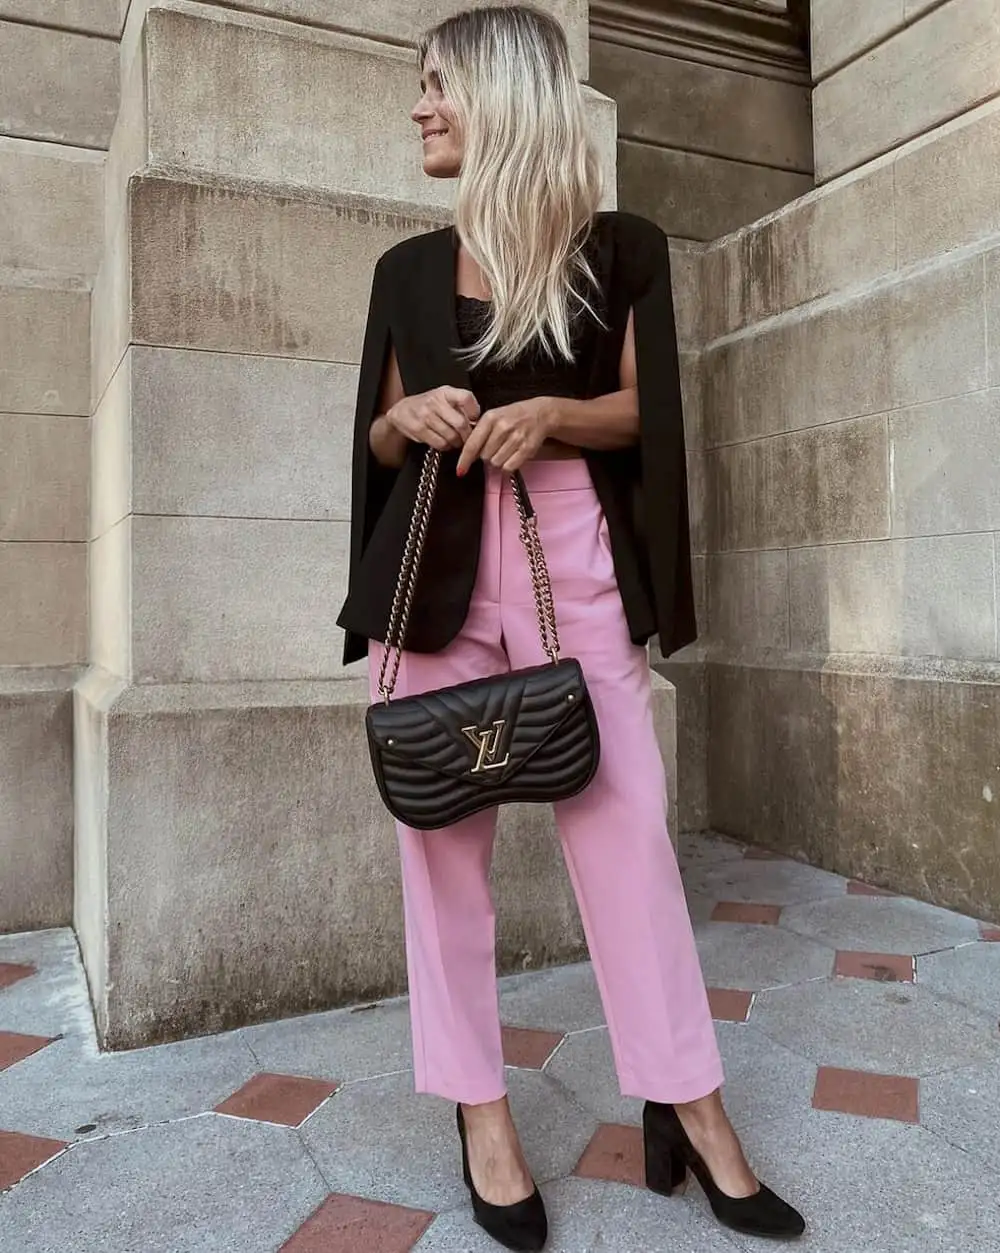 Rock Your Style With Pink and Black Outfit - 8 Perfect Ideas for a Trendy Look